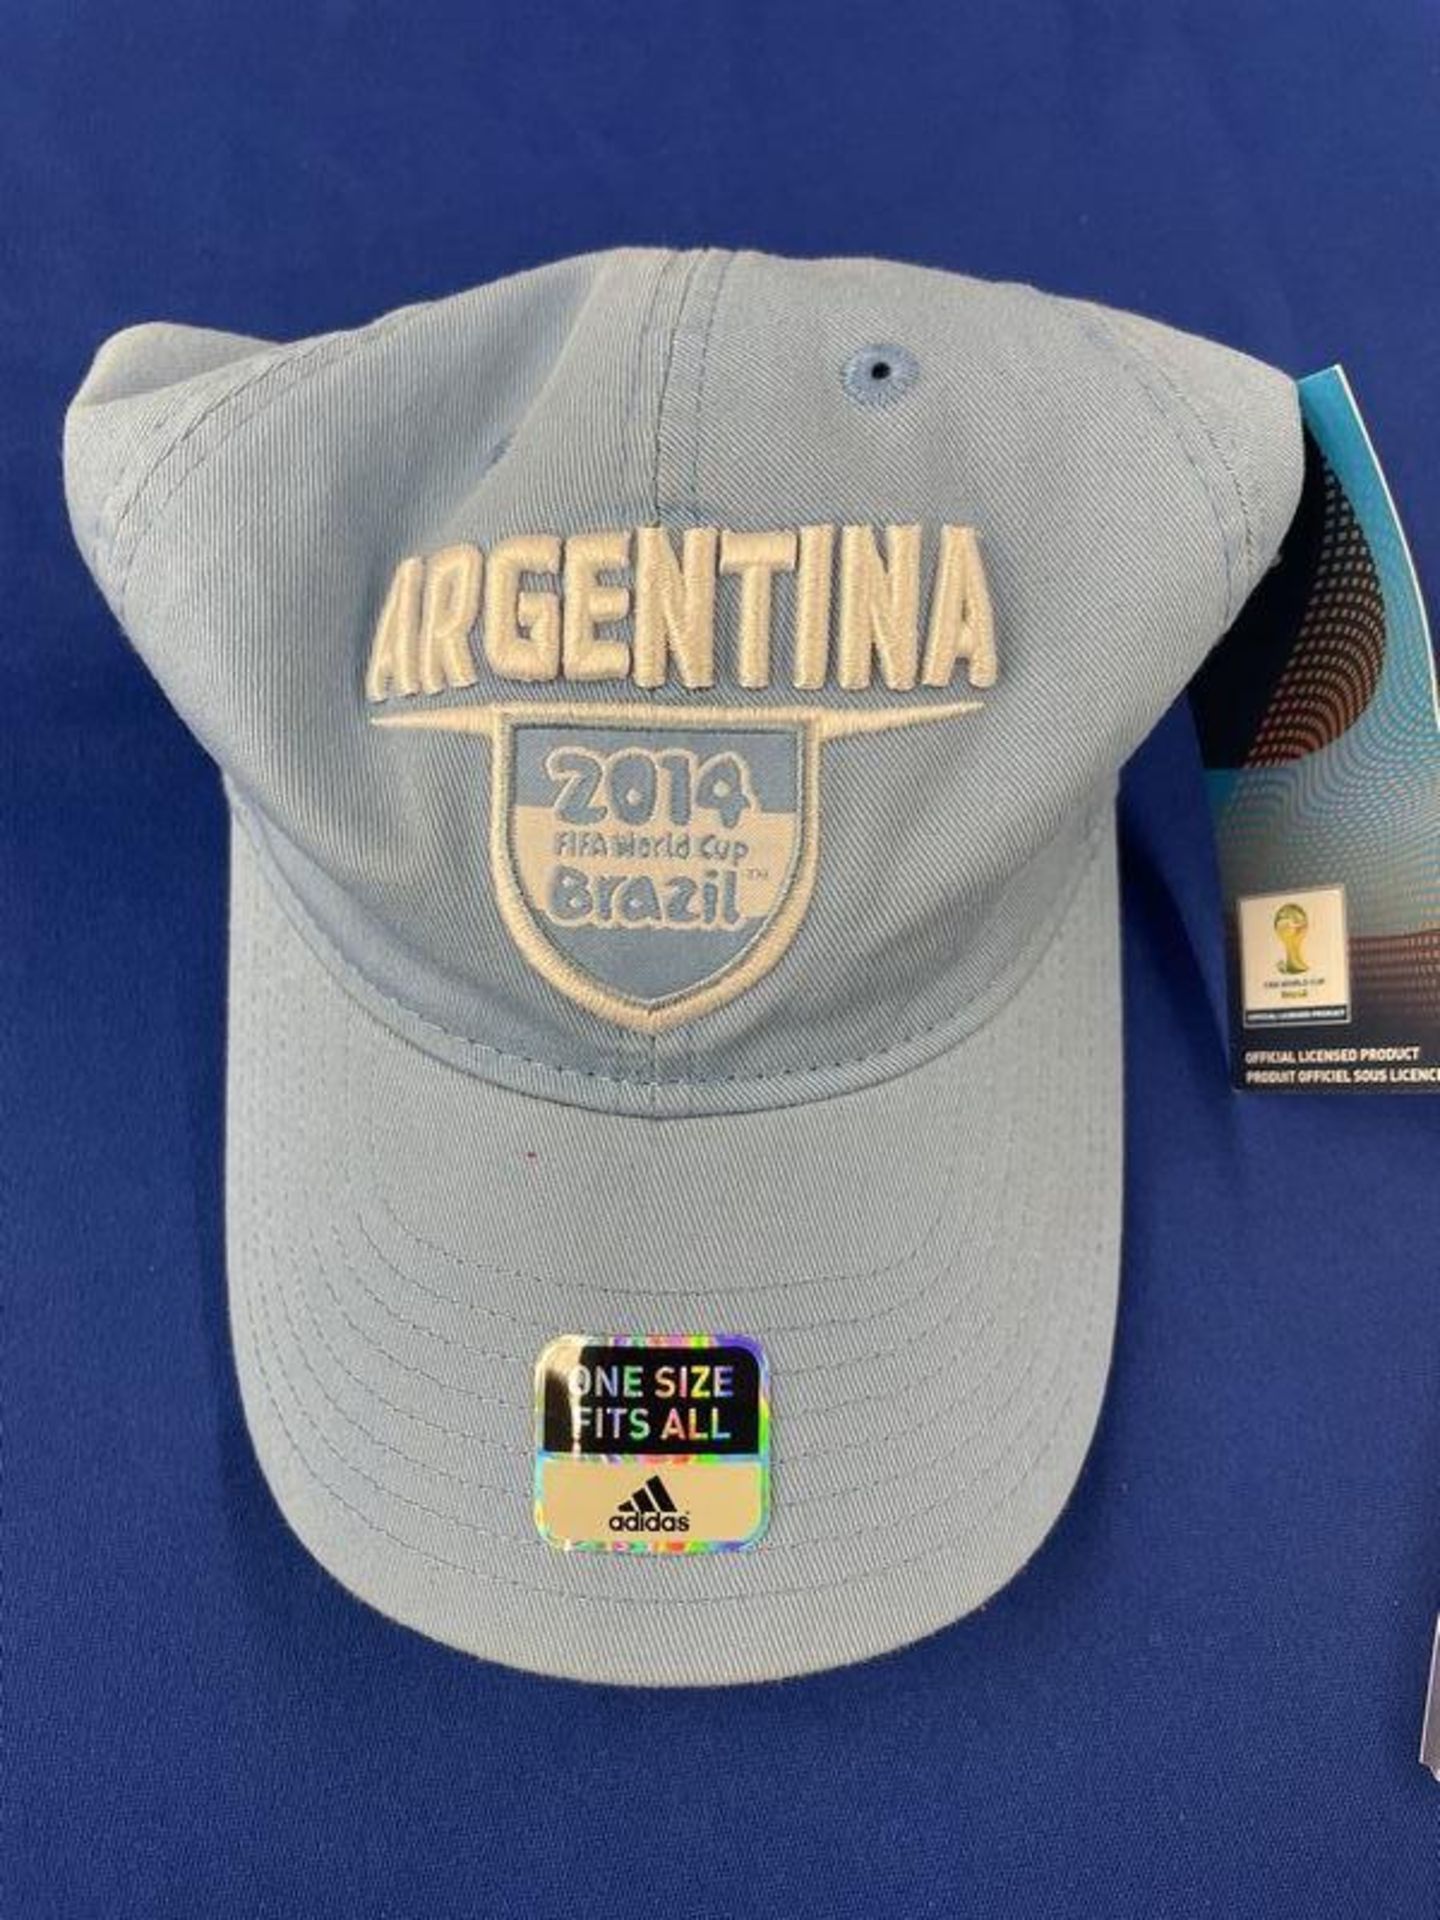 (LOT) 2014 FIFA Argentina Hat (NIB) and Messi Topps Player Card PSA Graded Mint 9 (April 2011) - Image 3 of 3